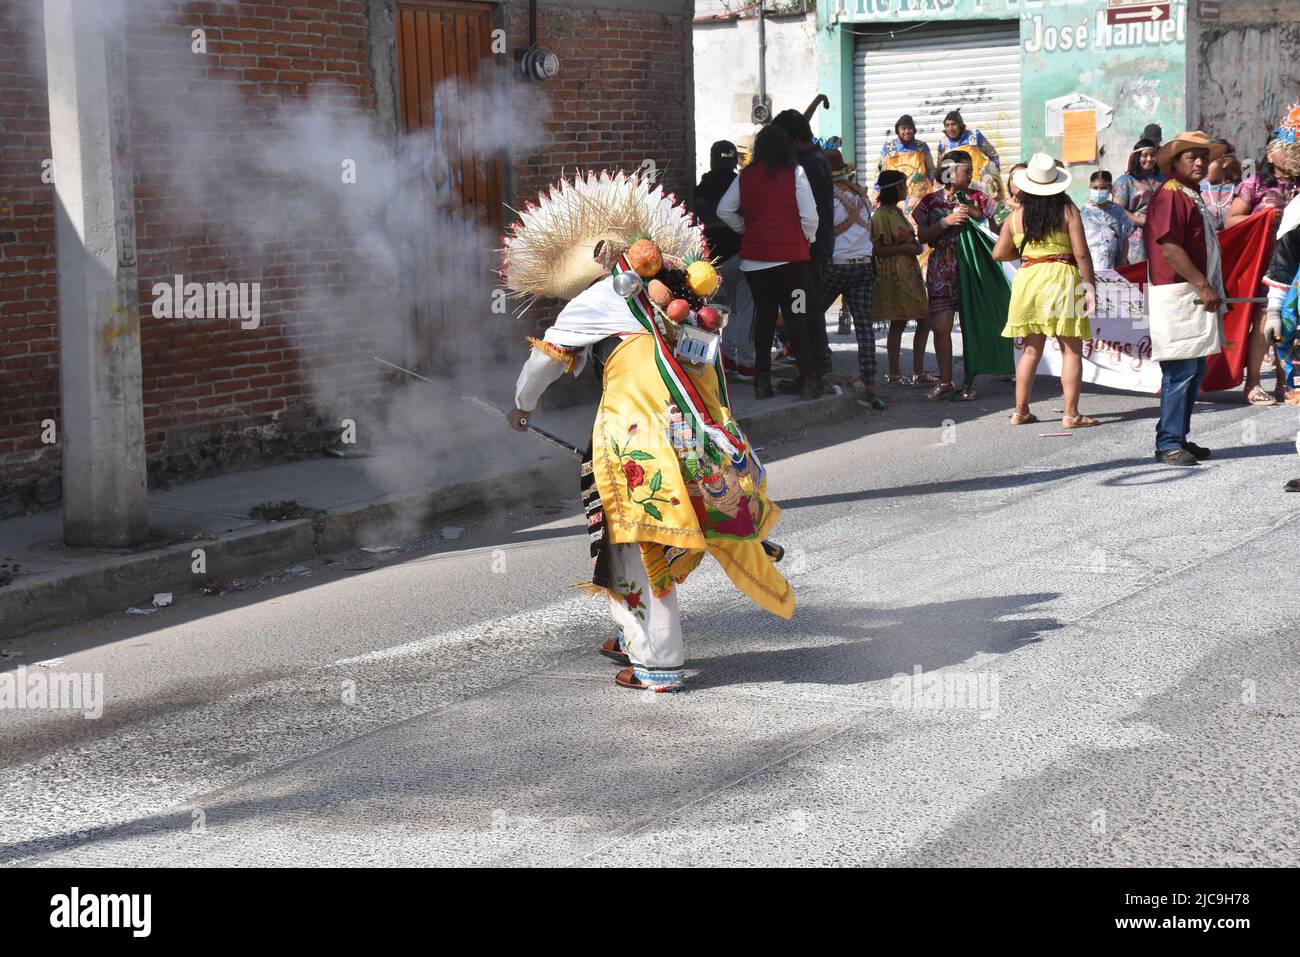 Guns being fired during Carnaval in Huejotzingo, Puebla Mexico Stock Photo